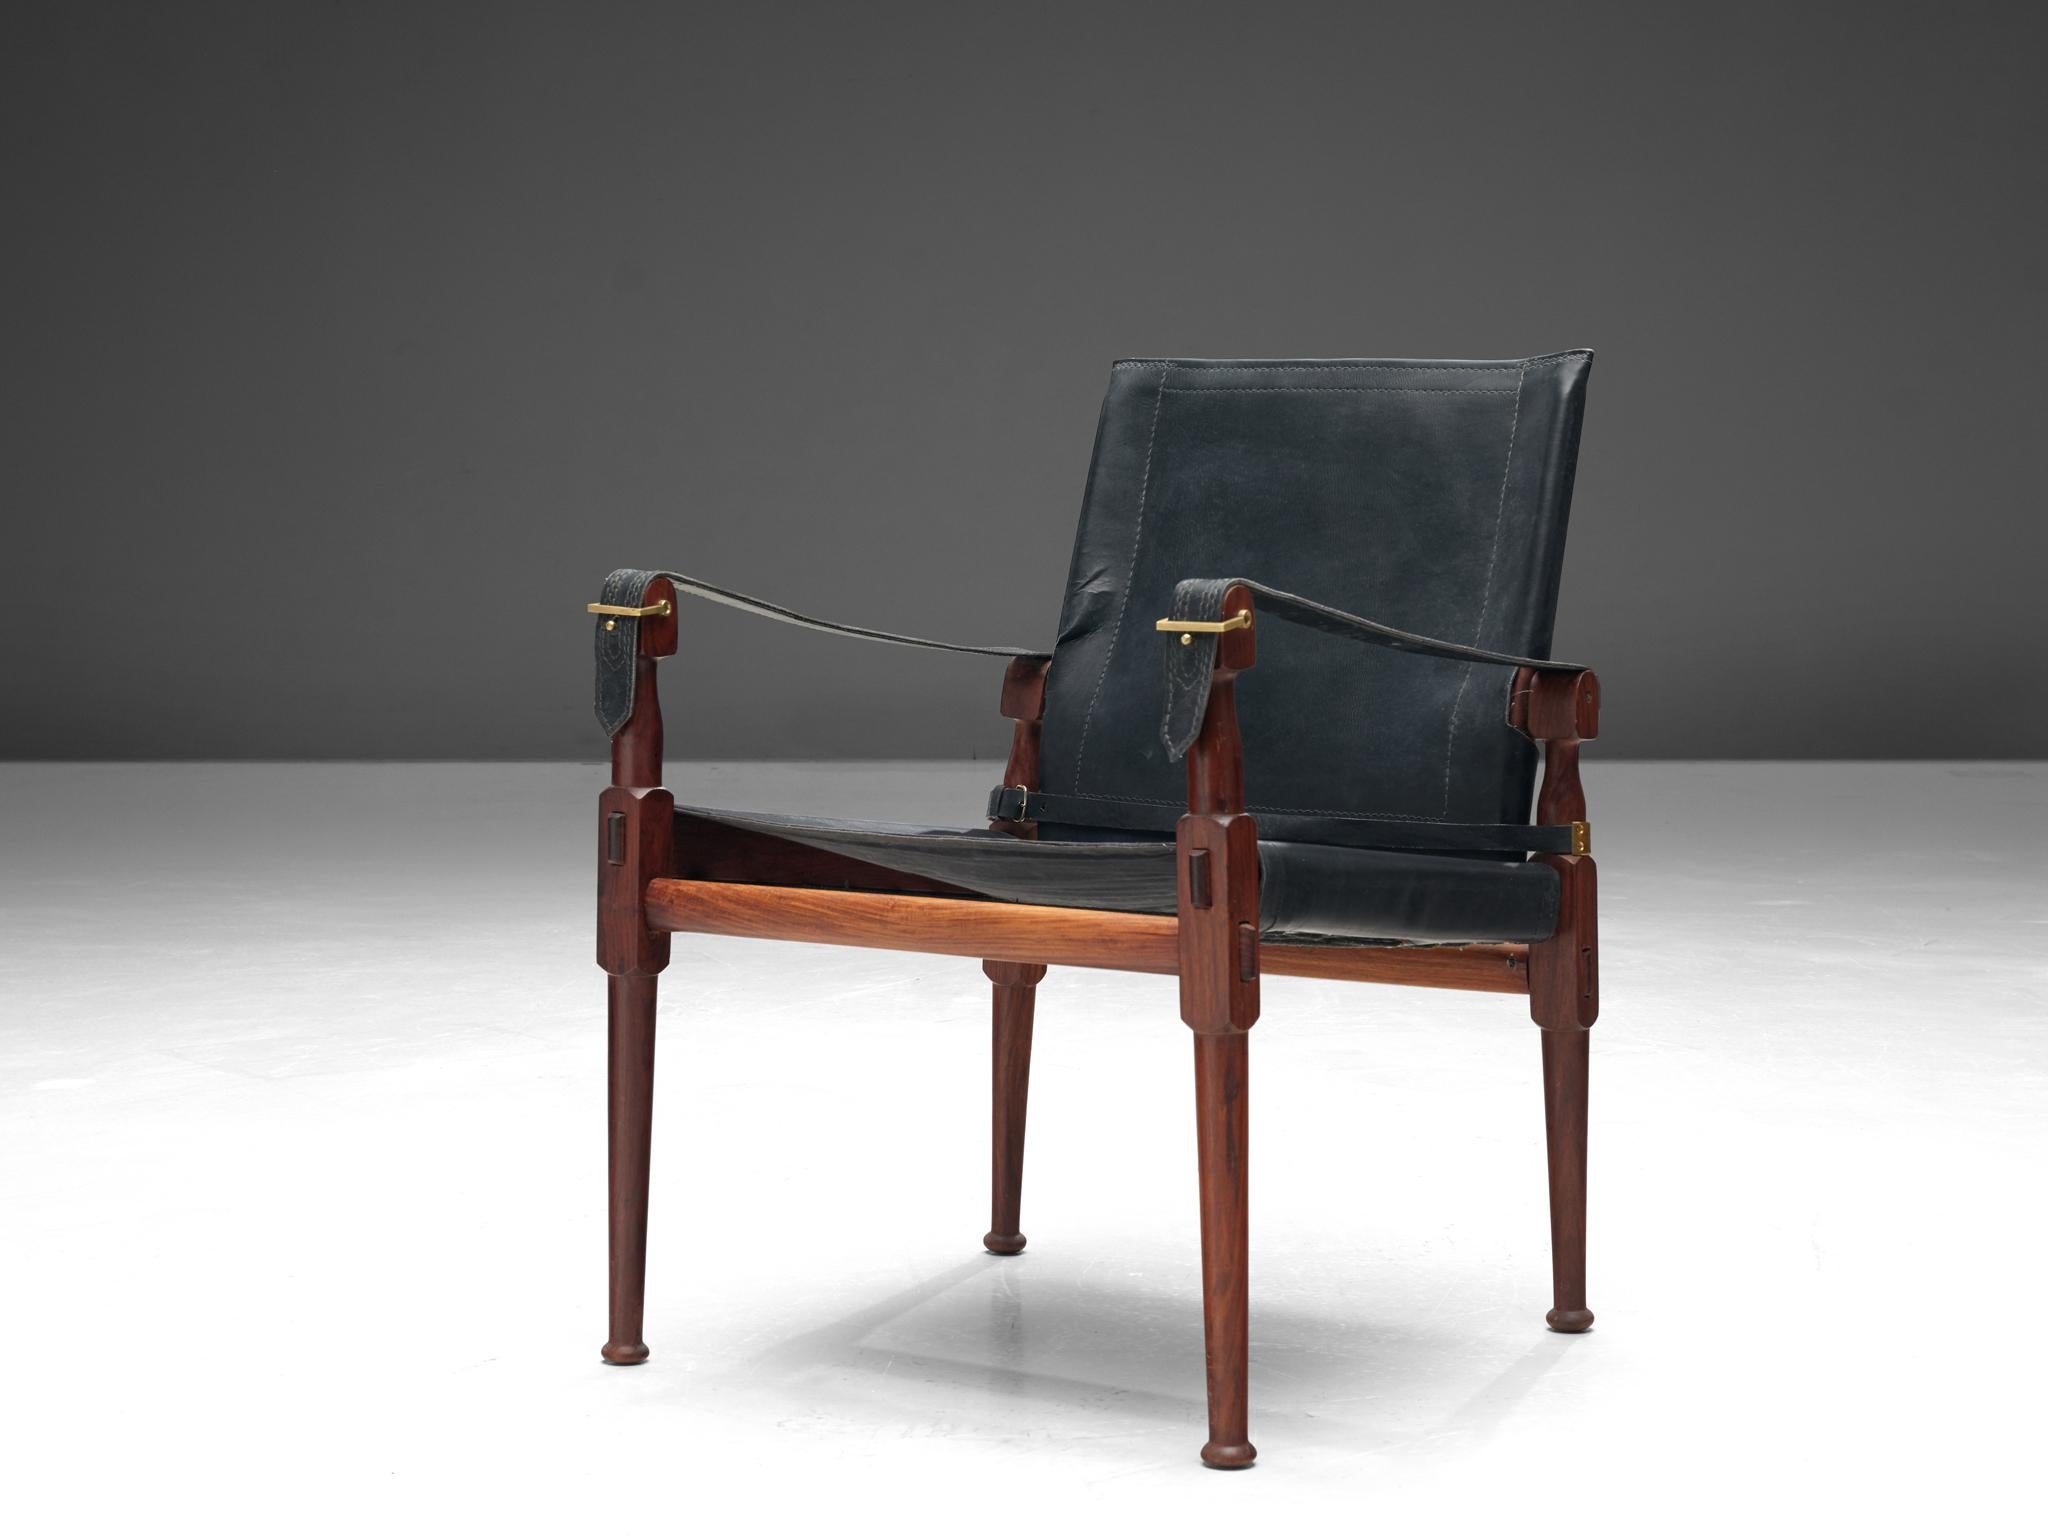 'Safari' lounge chair, wood, black leather and brass, Pakistan, 1970s

This 'Safari' armchair shows very elegant and well designed lines, in combination with carefully crafted wood joints. The black leather with multiple straps completes this